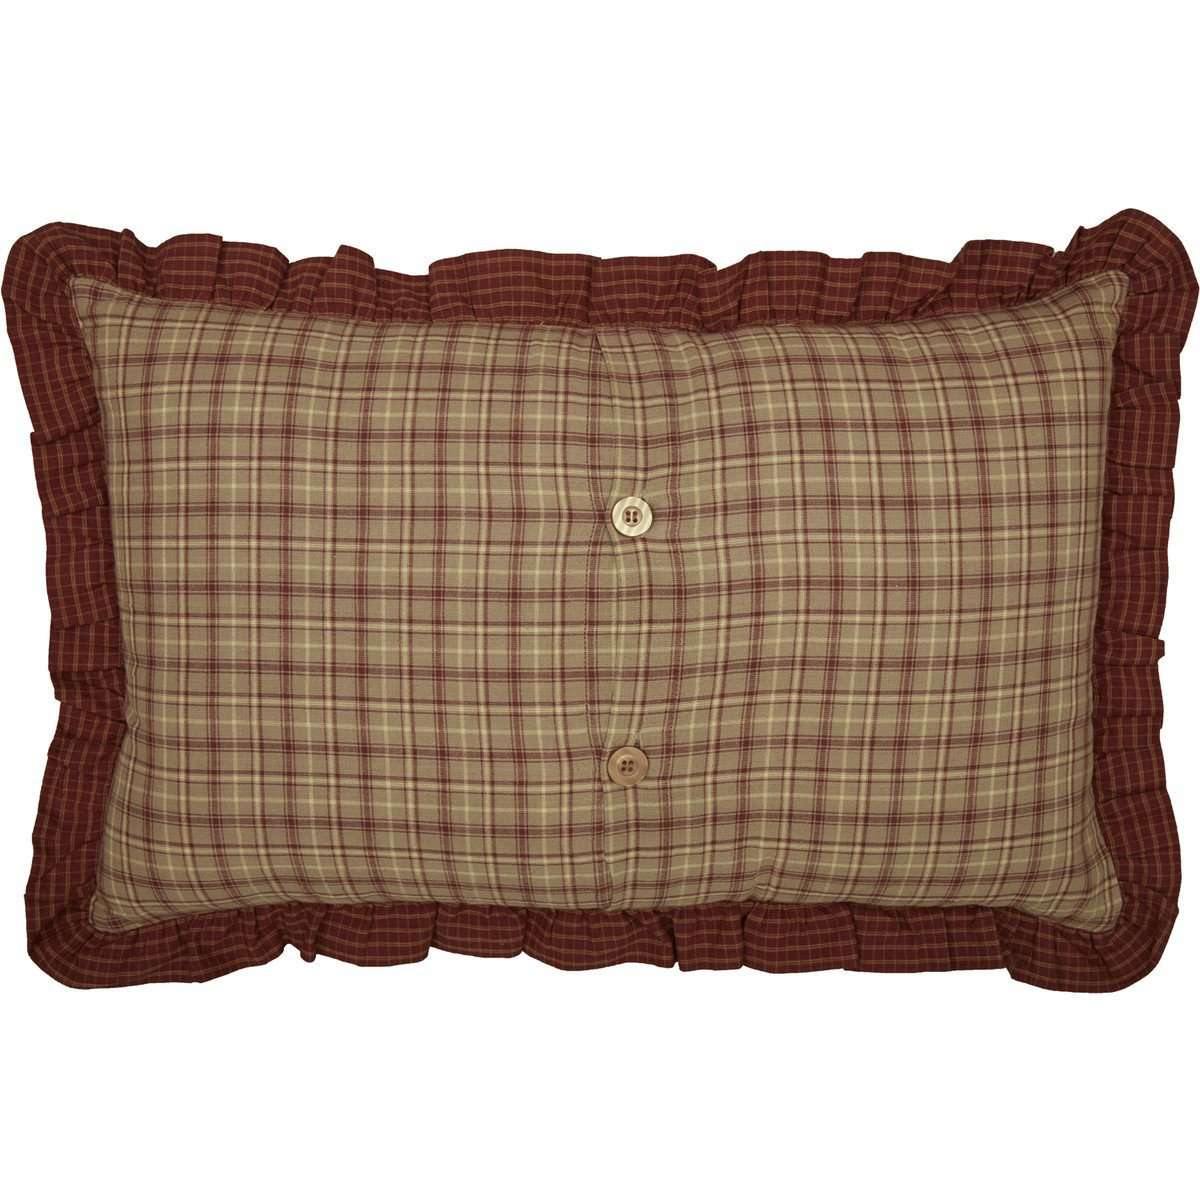 Dawson Star On Cabin Time Pillow 14x22 VHC Brands back